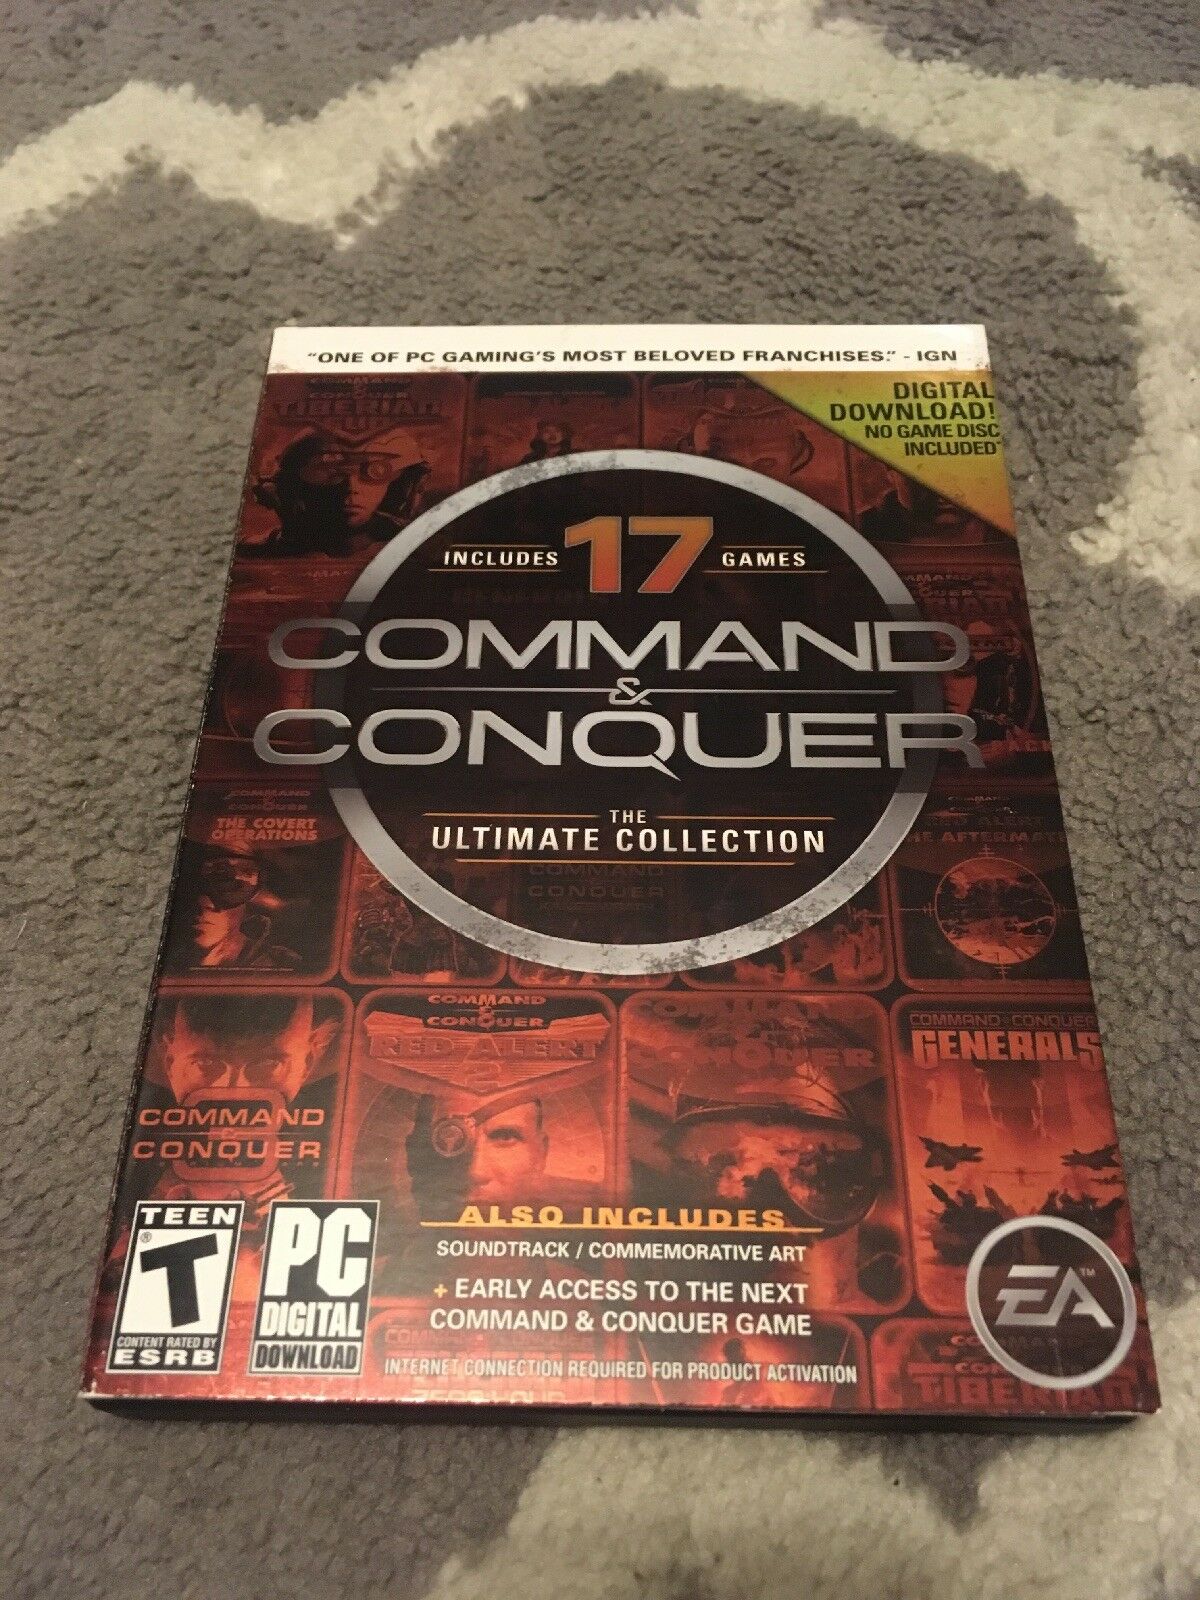 Command and conquer ultimate collection digital download